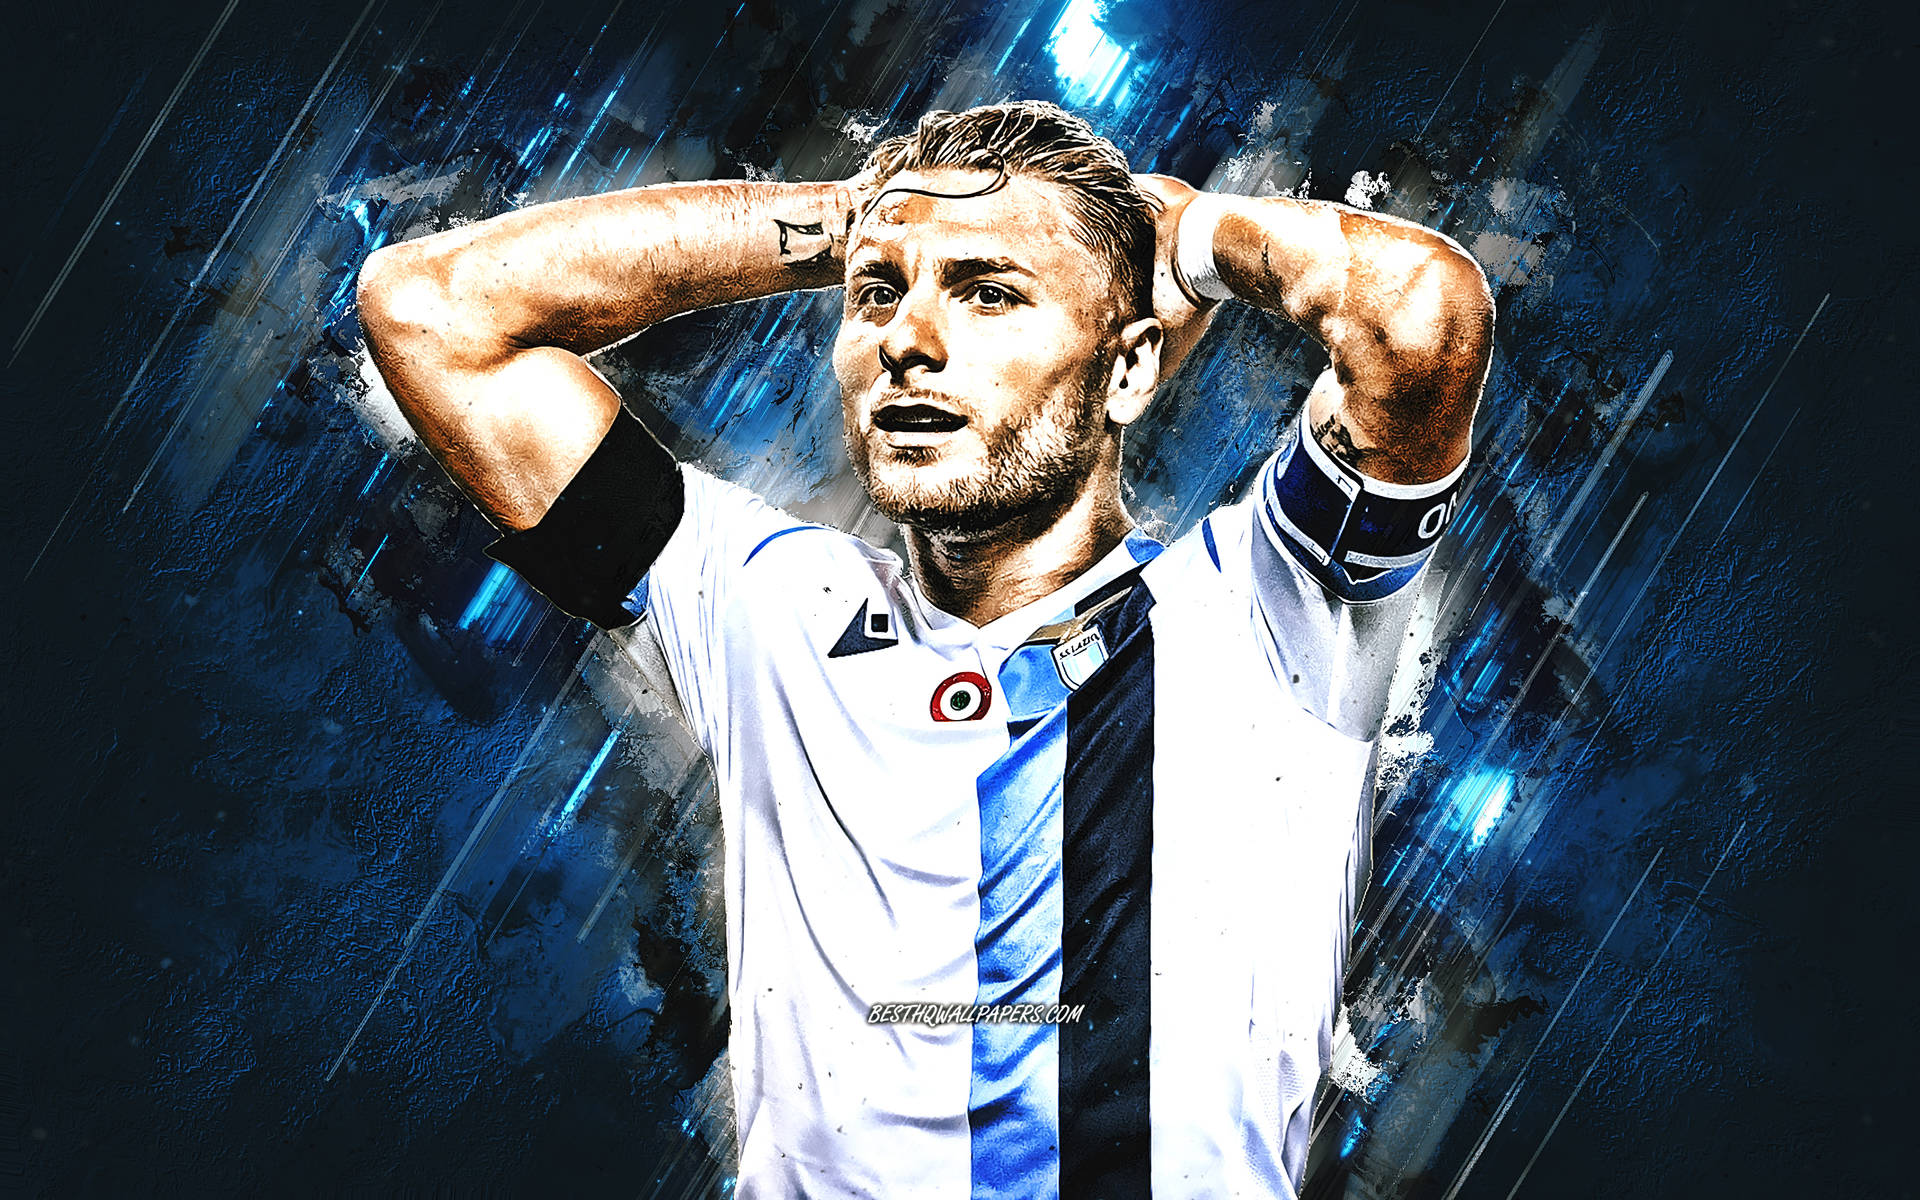 Football Prodigy Ciro Immobile In Action Background